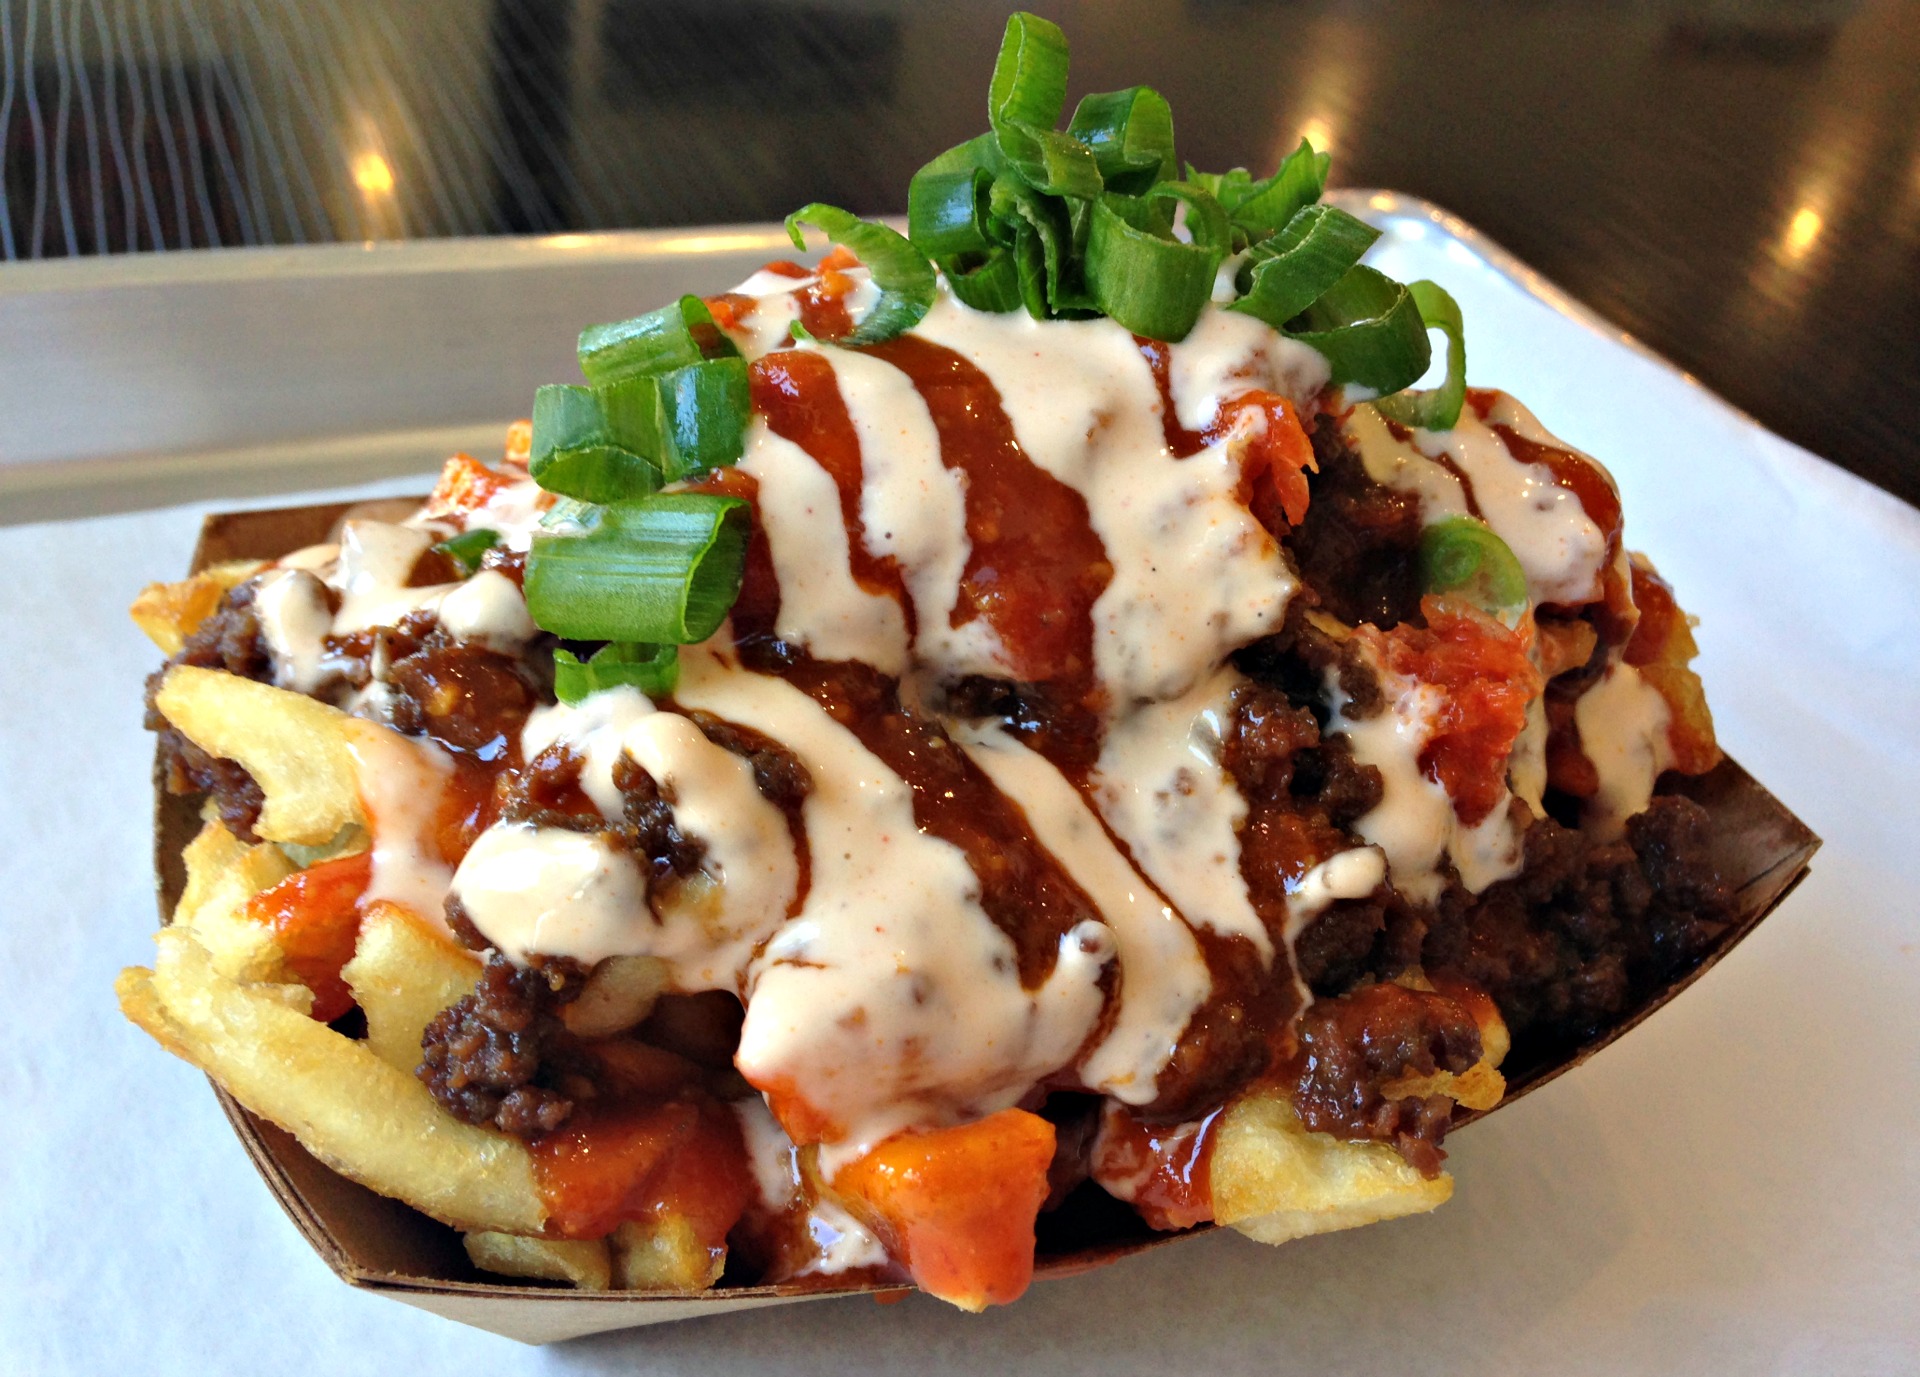 Try the Kamikaze Fries from one of KoJa Kitchen's many Bay Area locations.